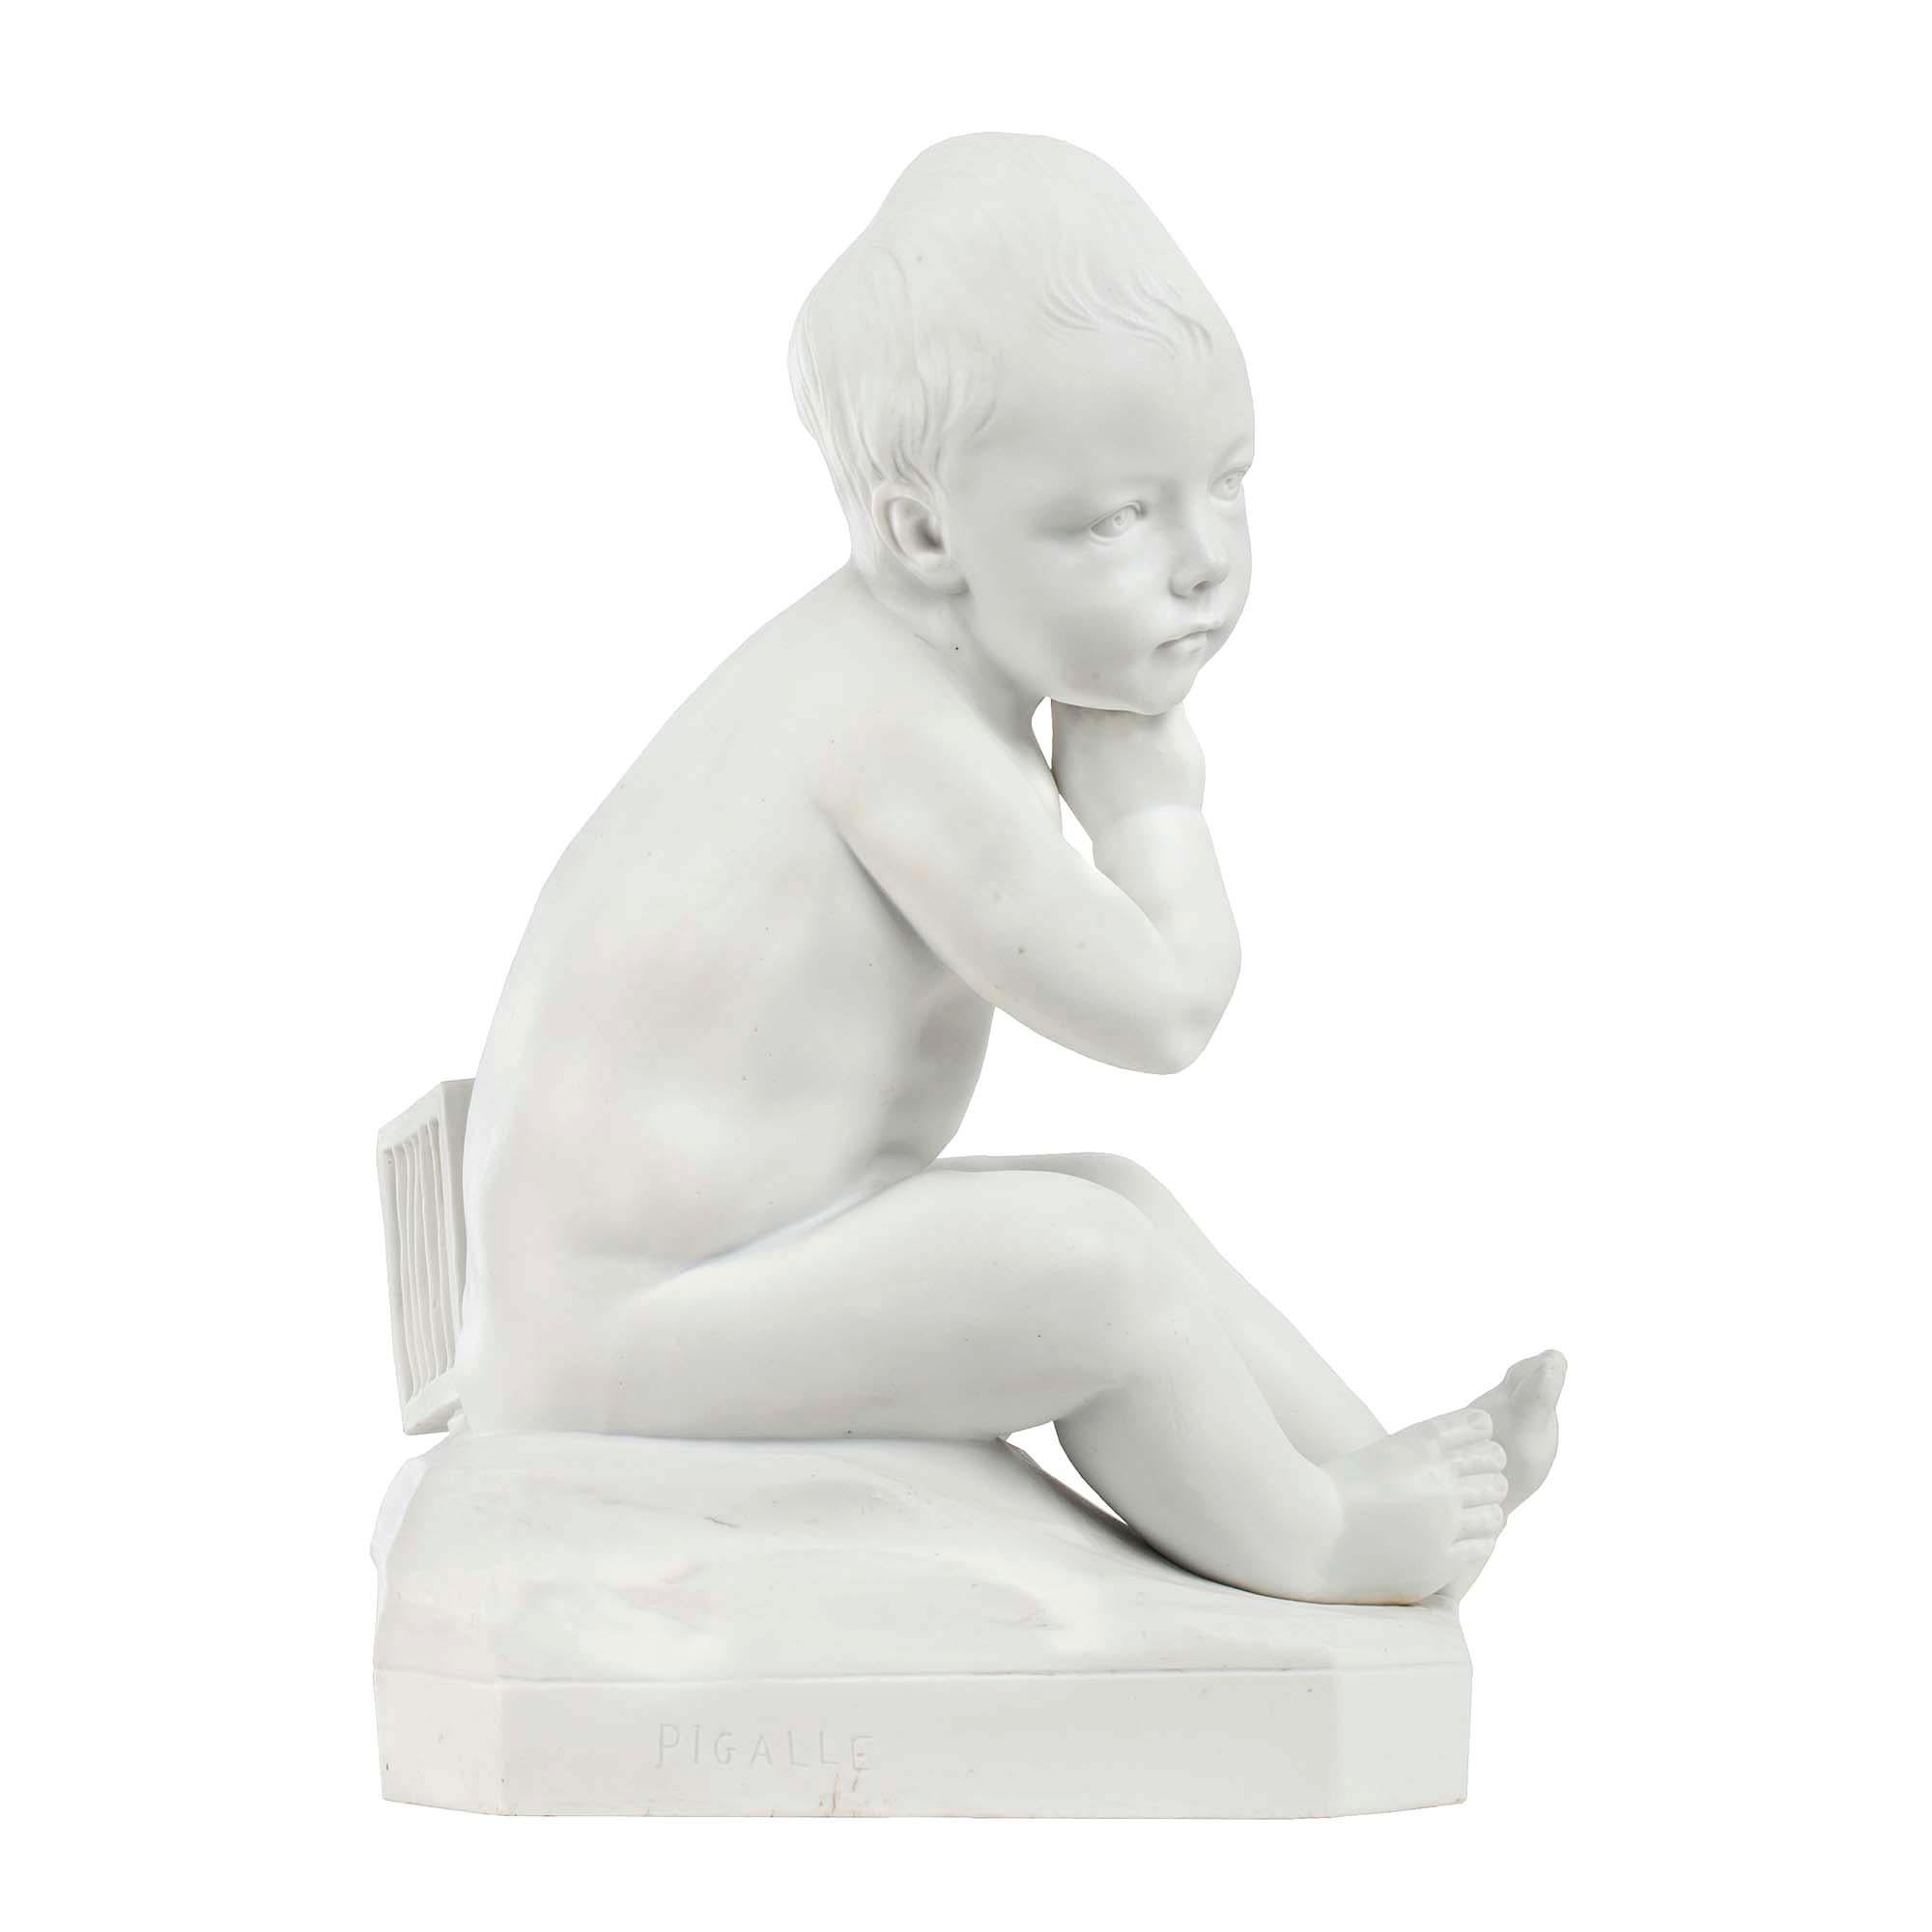 French 19th Century Biscuit De Sèvres Statuary of “Enfant À La Cage” In Good Condition For Sale In West Palm Beach, FL